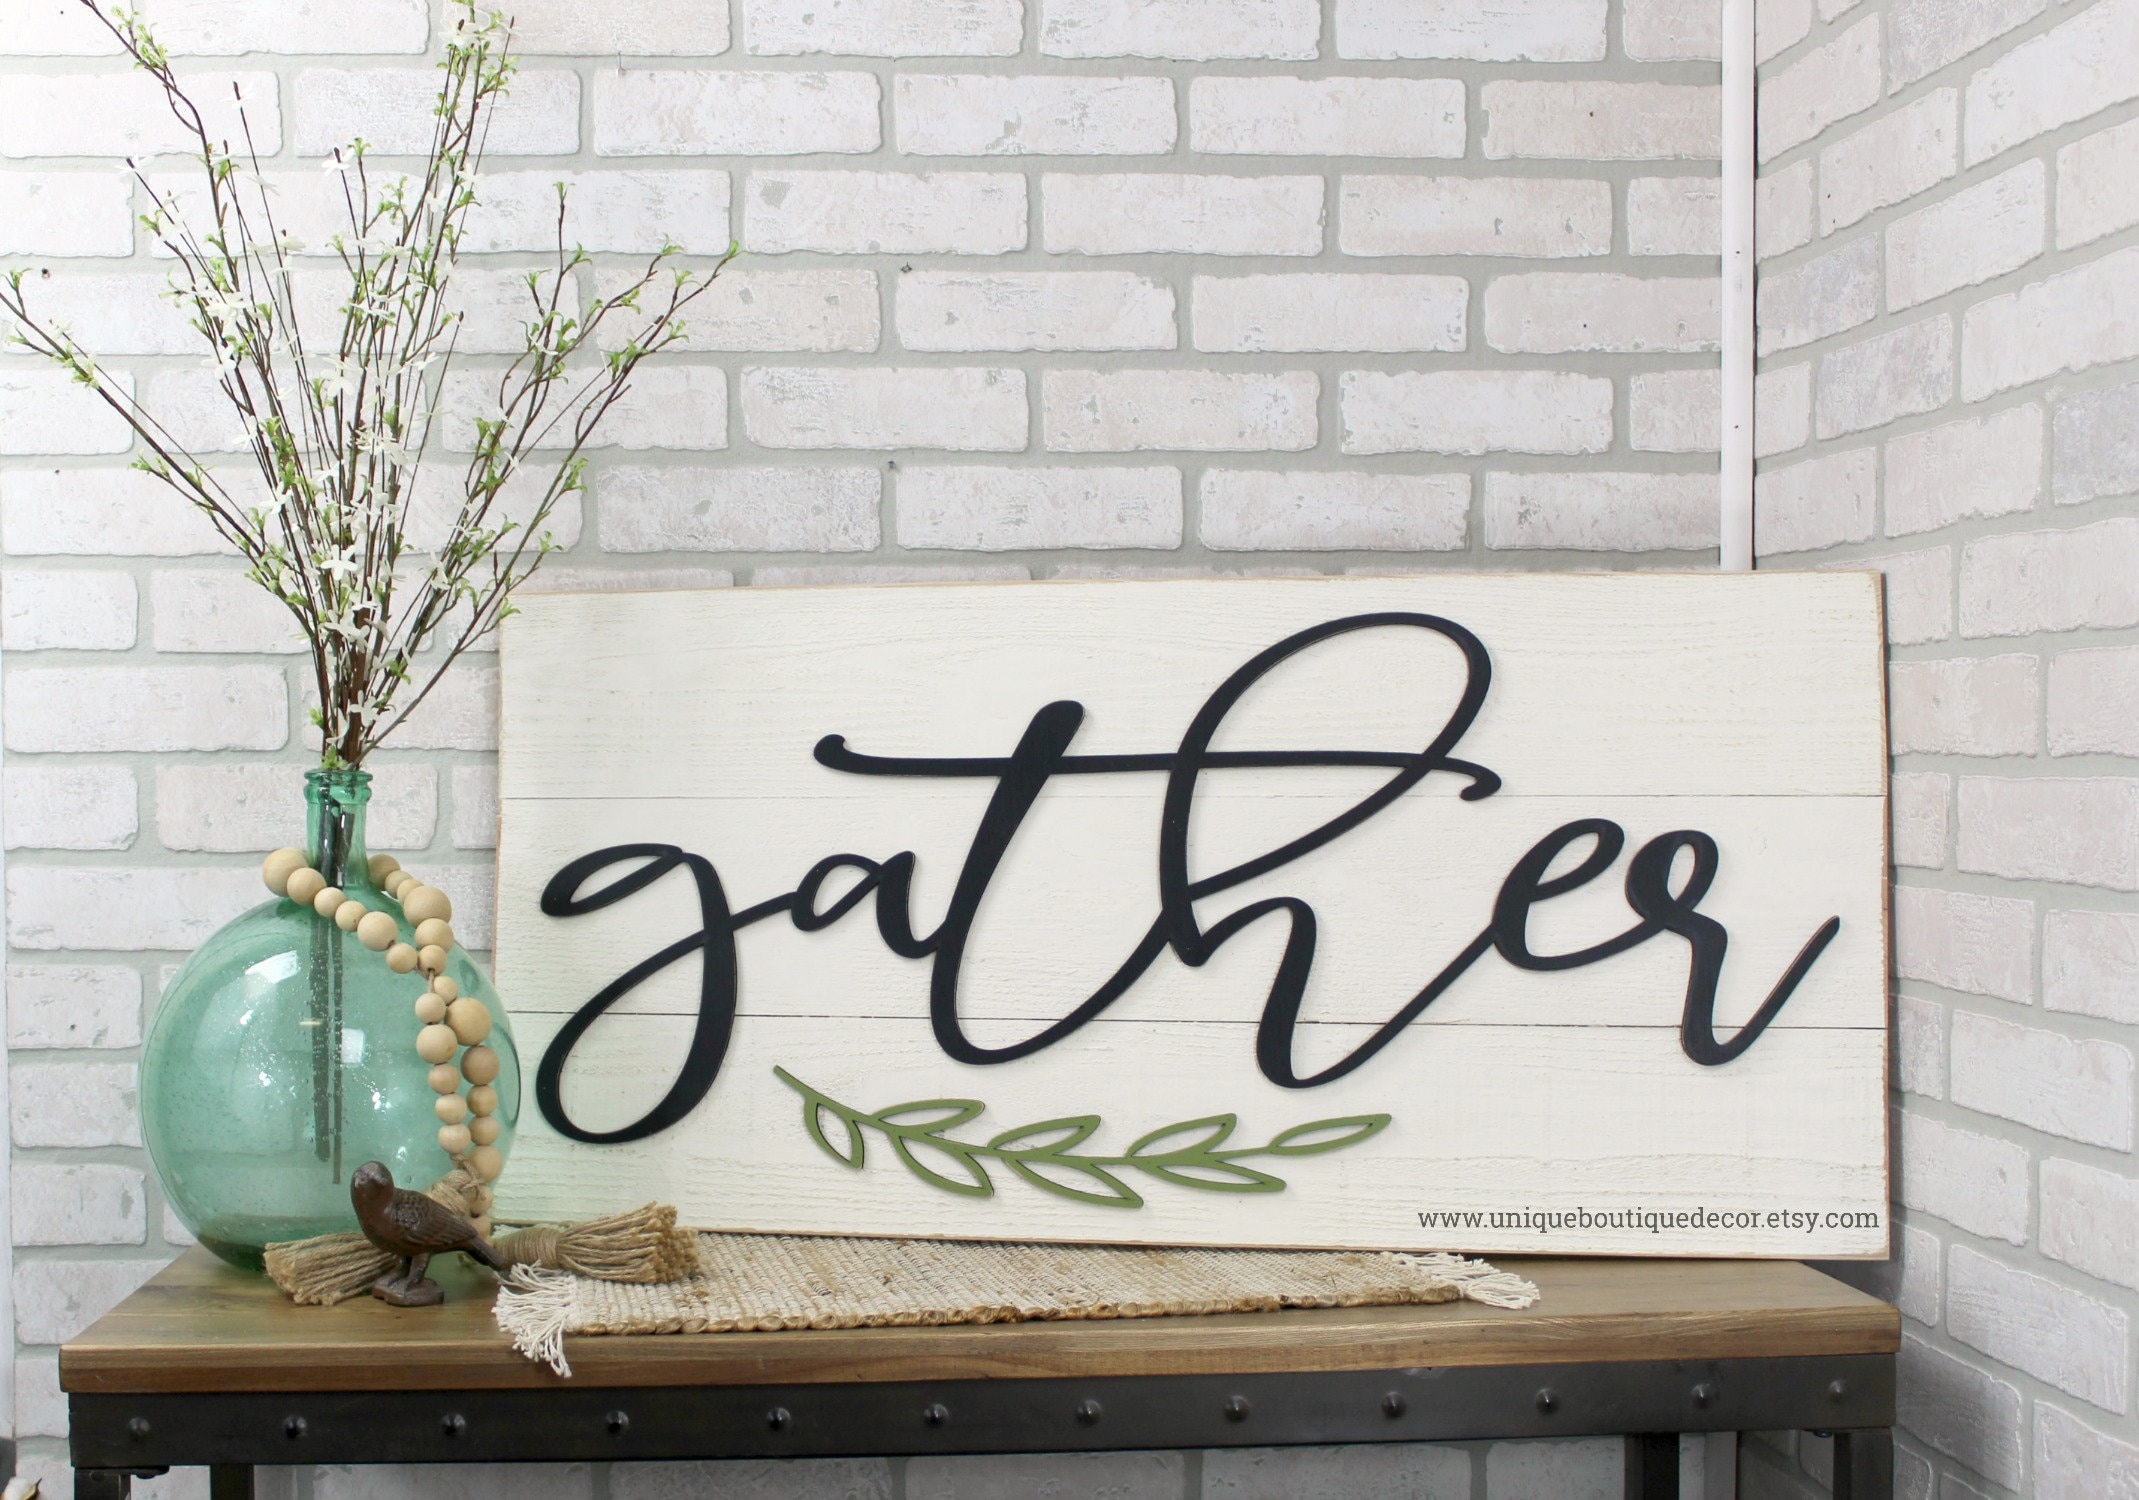 GATHER Rustic Wood Sign Distressed White Decor Farmhouse Fixer Upper Style